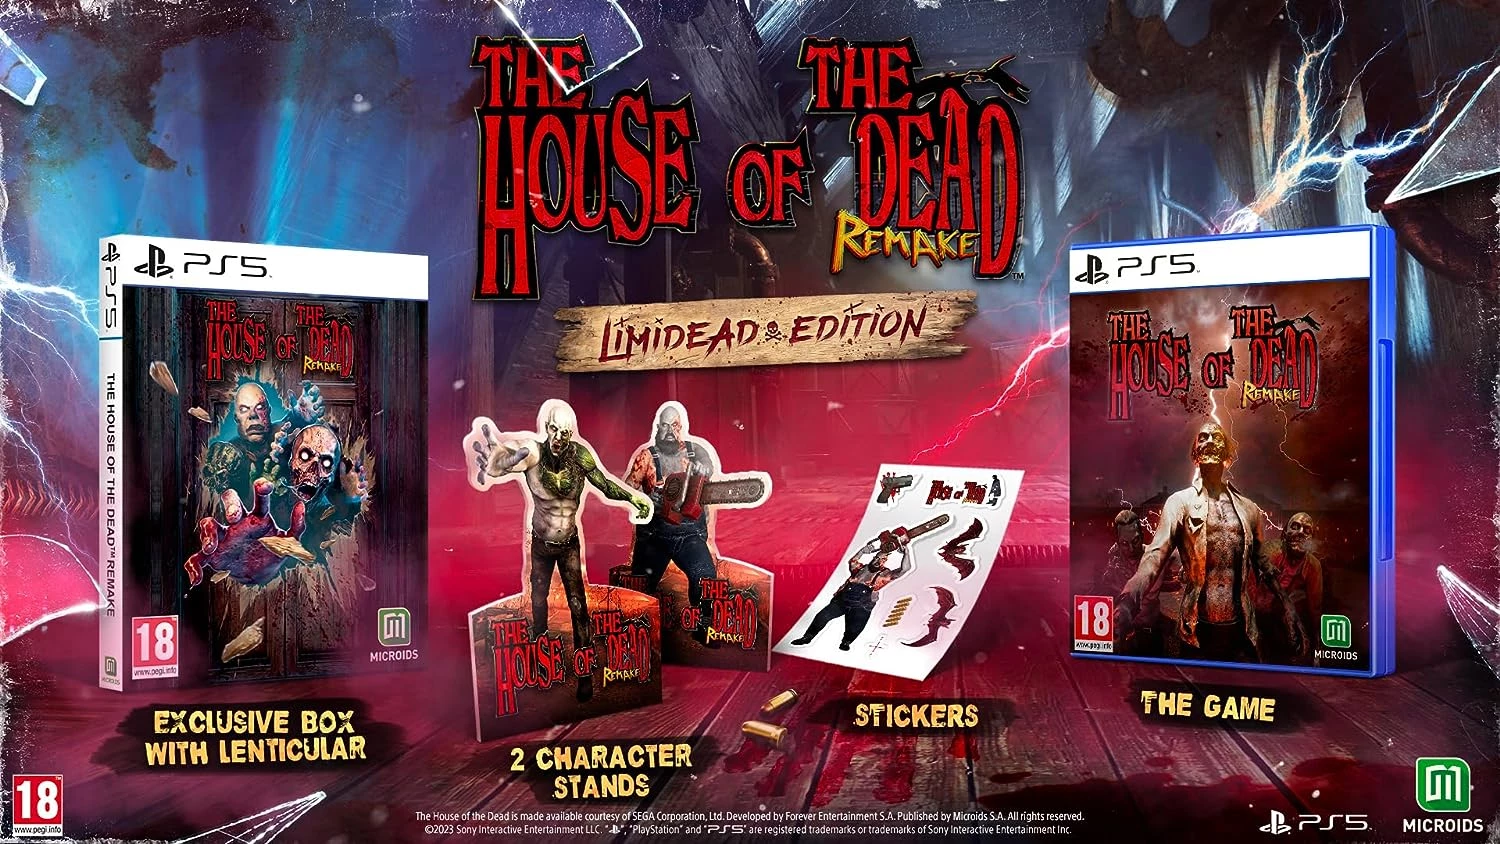 The House of the Dead Remake - Limidead Edition (PS5), Microids